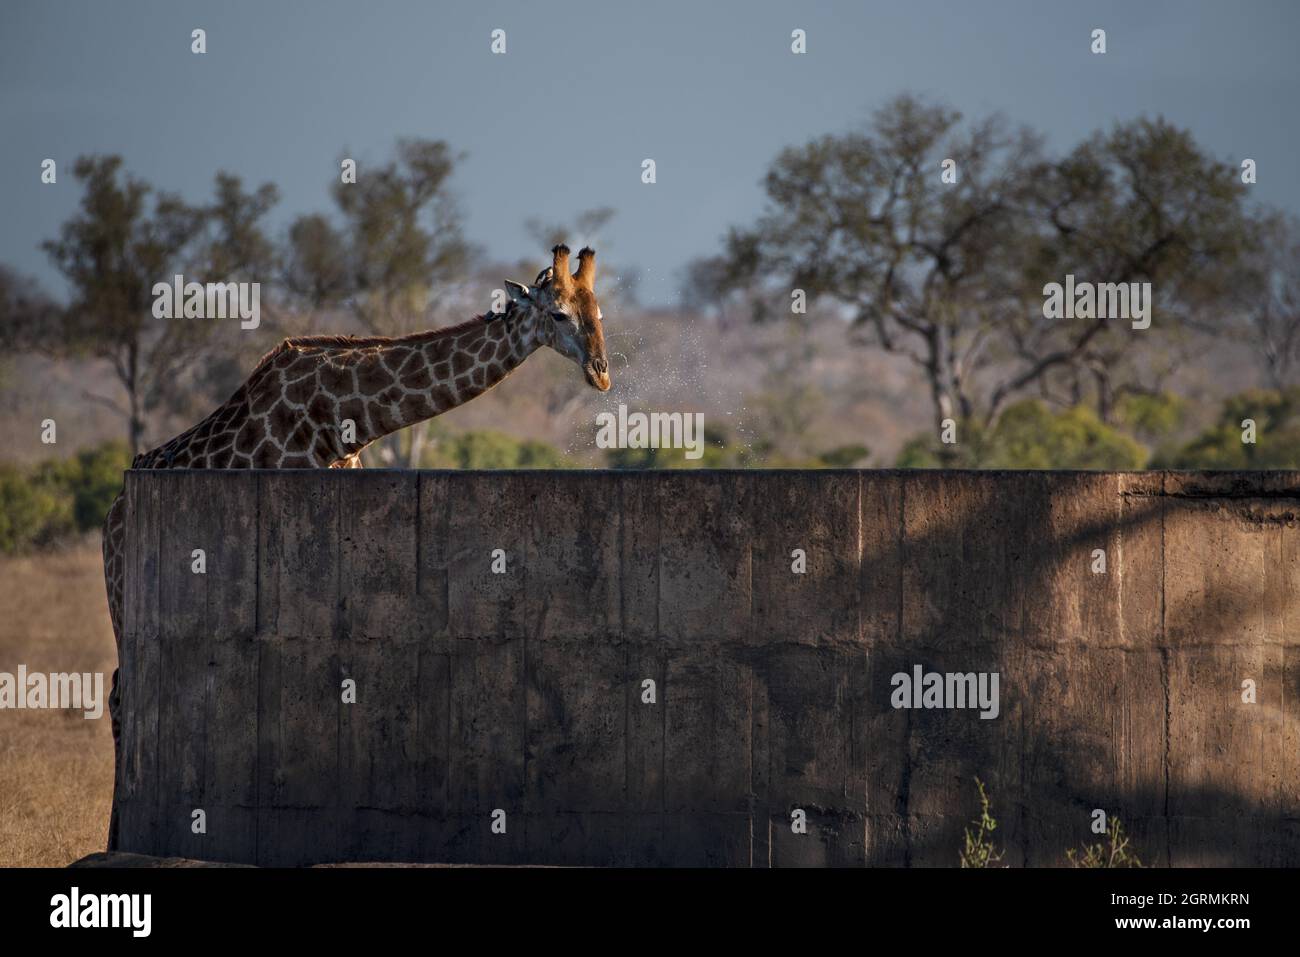 A giraffe drinking from a reservoir in the Kruger National Park Stock Photo